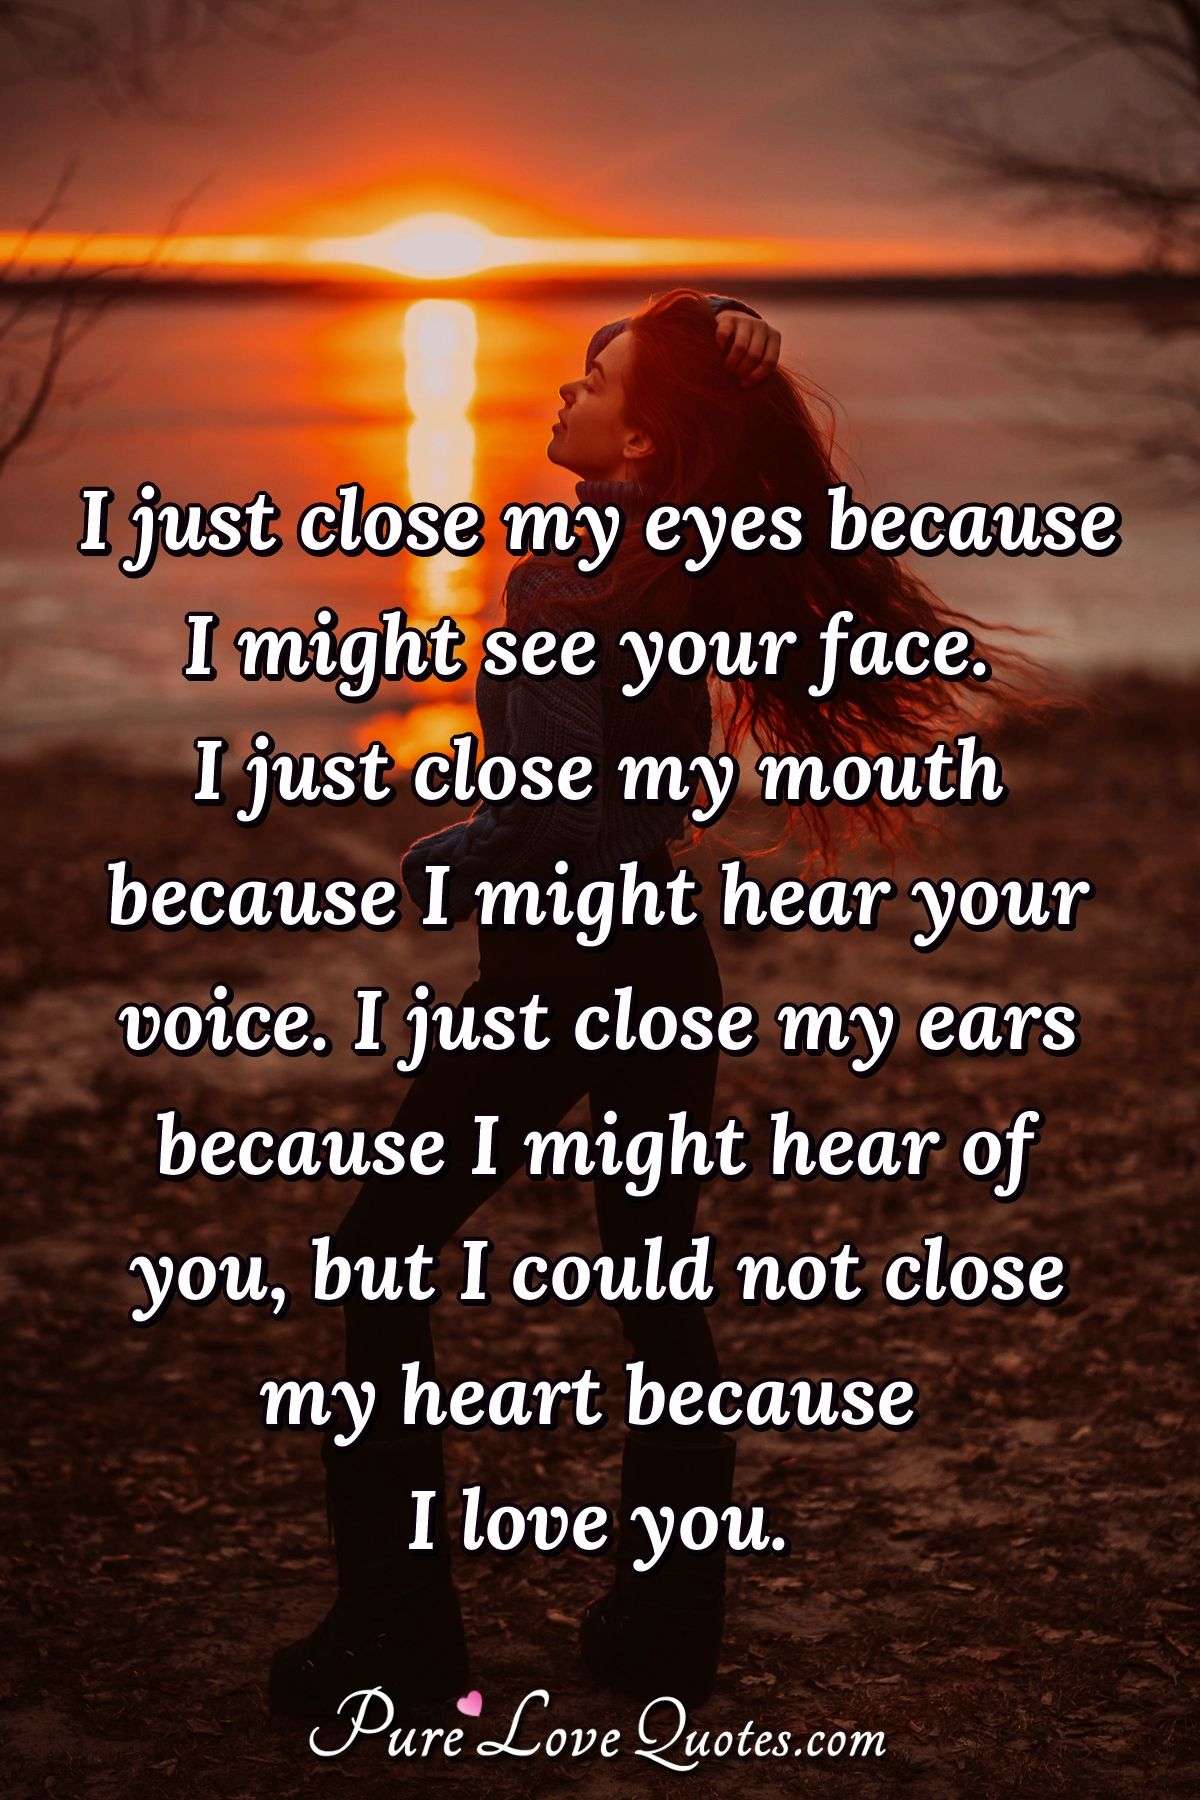 I just close my eyes because I might see your face. I just close